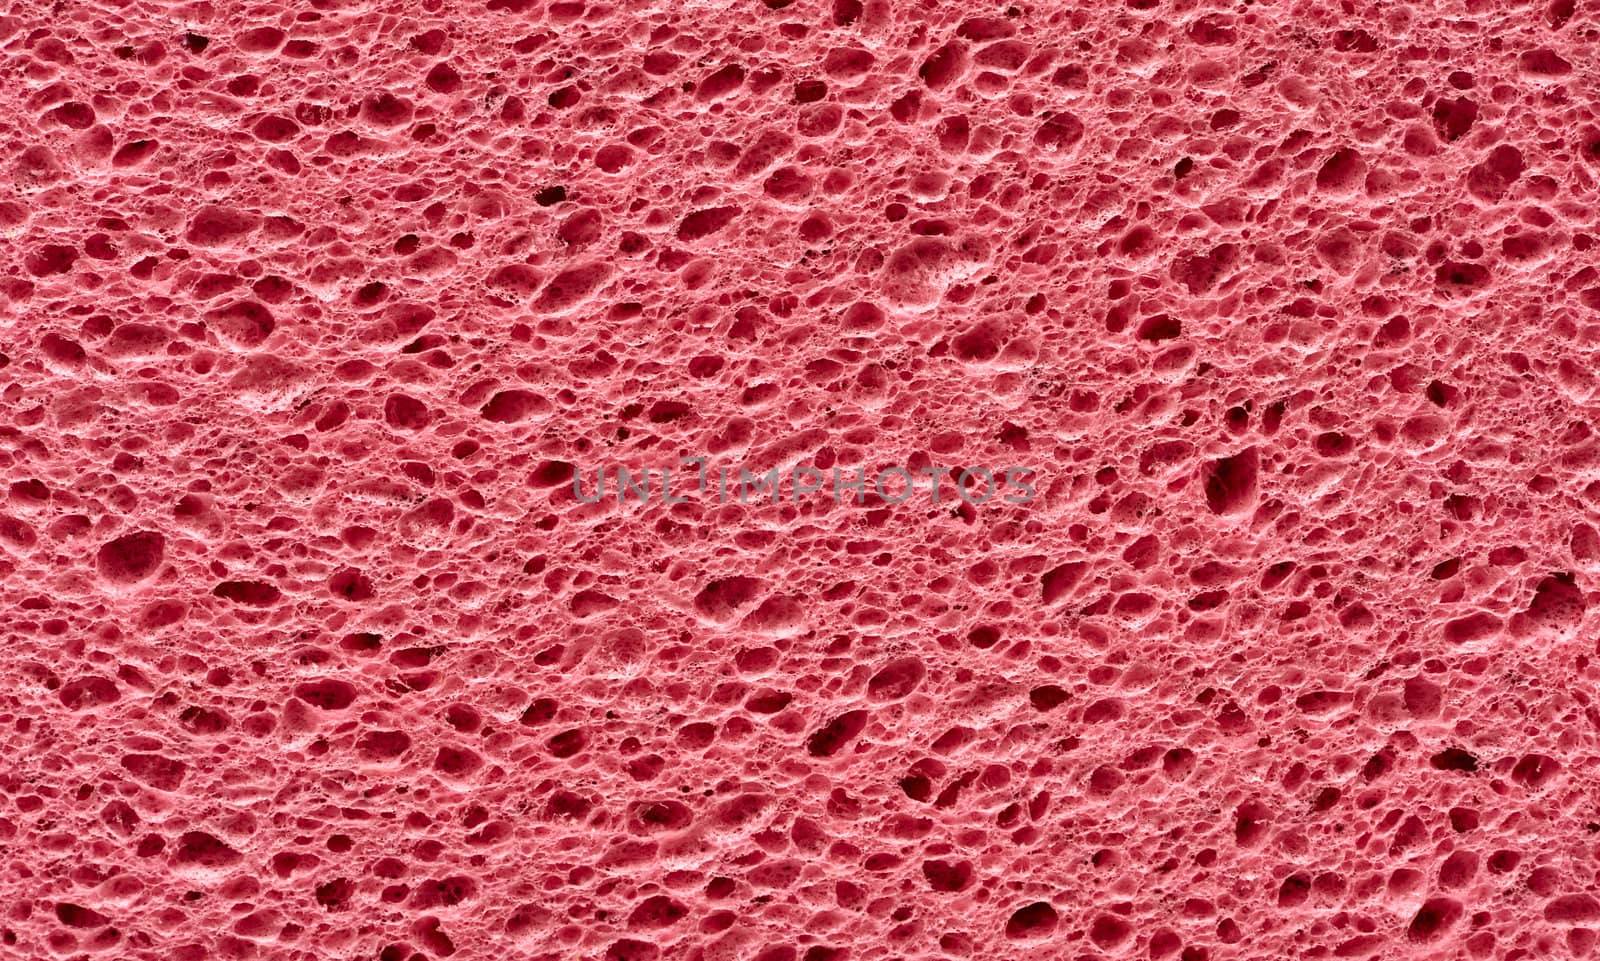 pink sponge with porous texture background by DNKSTUDIO